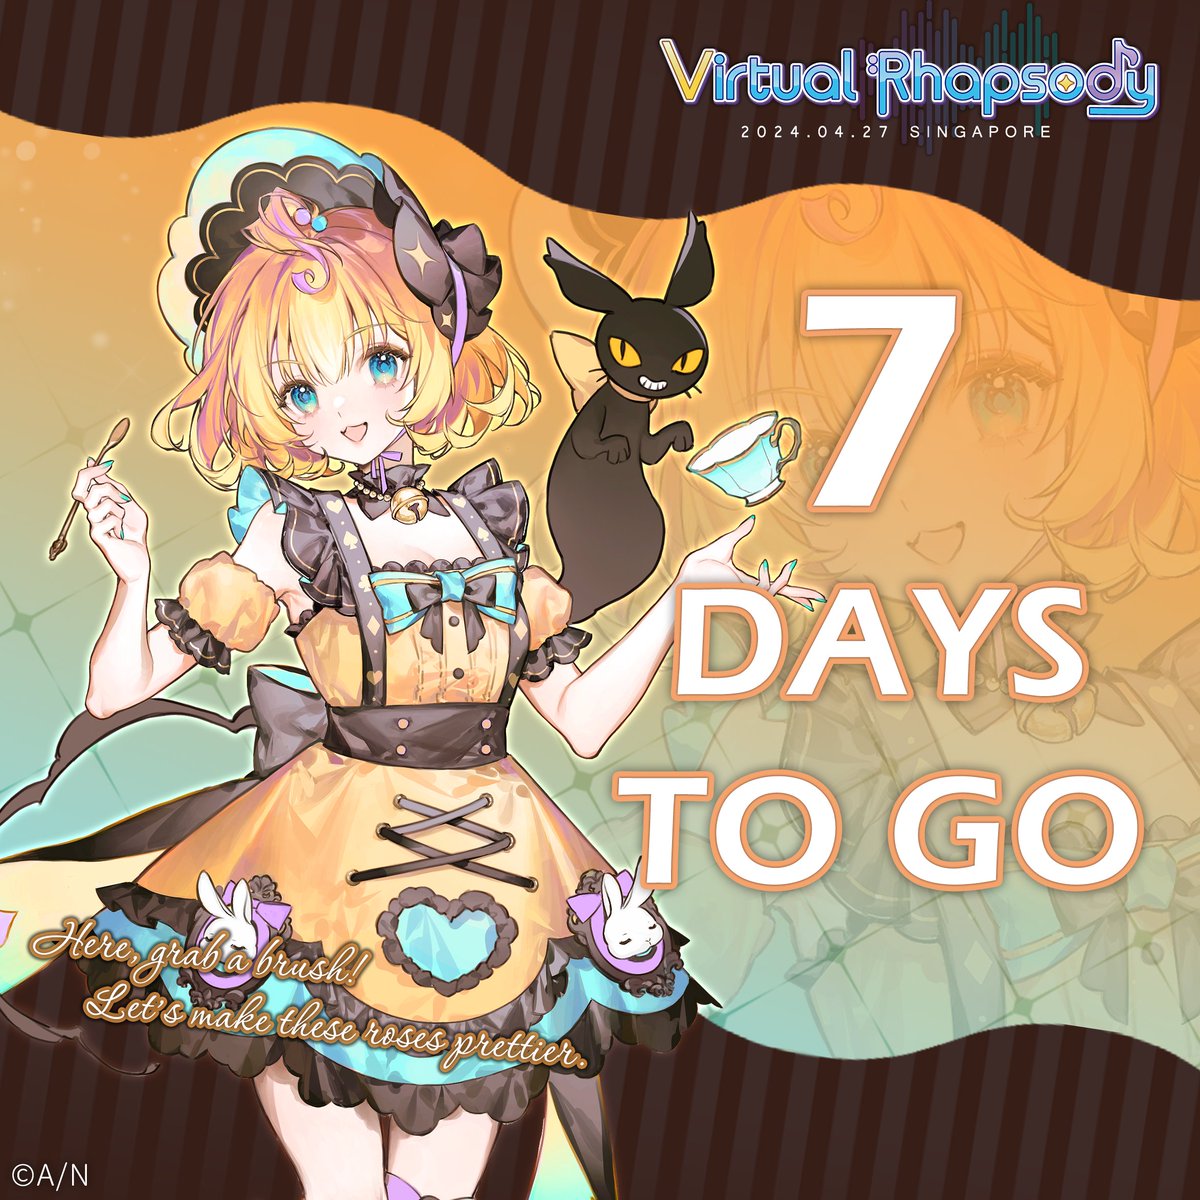 Only 7 days left until the event kicks off! ✨ Get ready to have an amazing time with @MillieParfait ! Don't miss out, get your tickets and exclusive merch now! 🛒virtualrhapsody.net #VRhapSG #VirtualRhapsody #NIJISANJI_EN